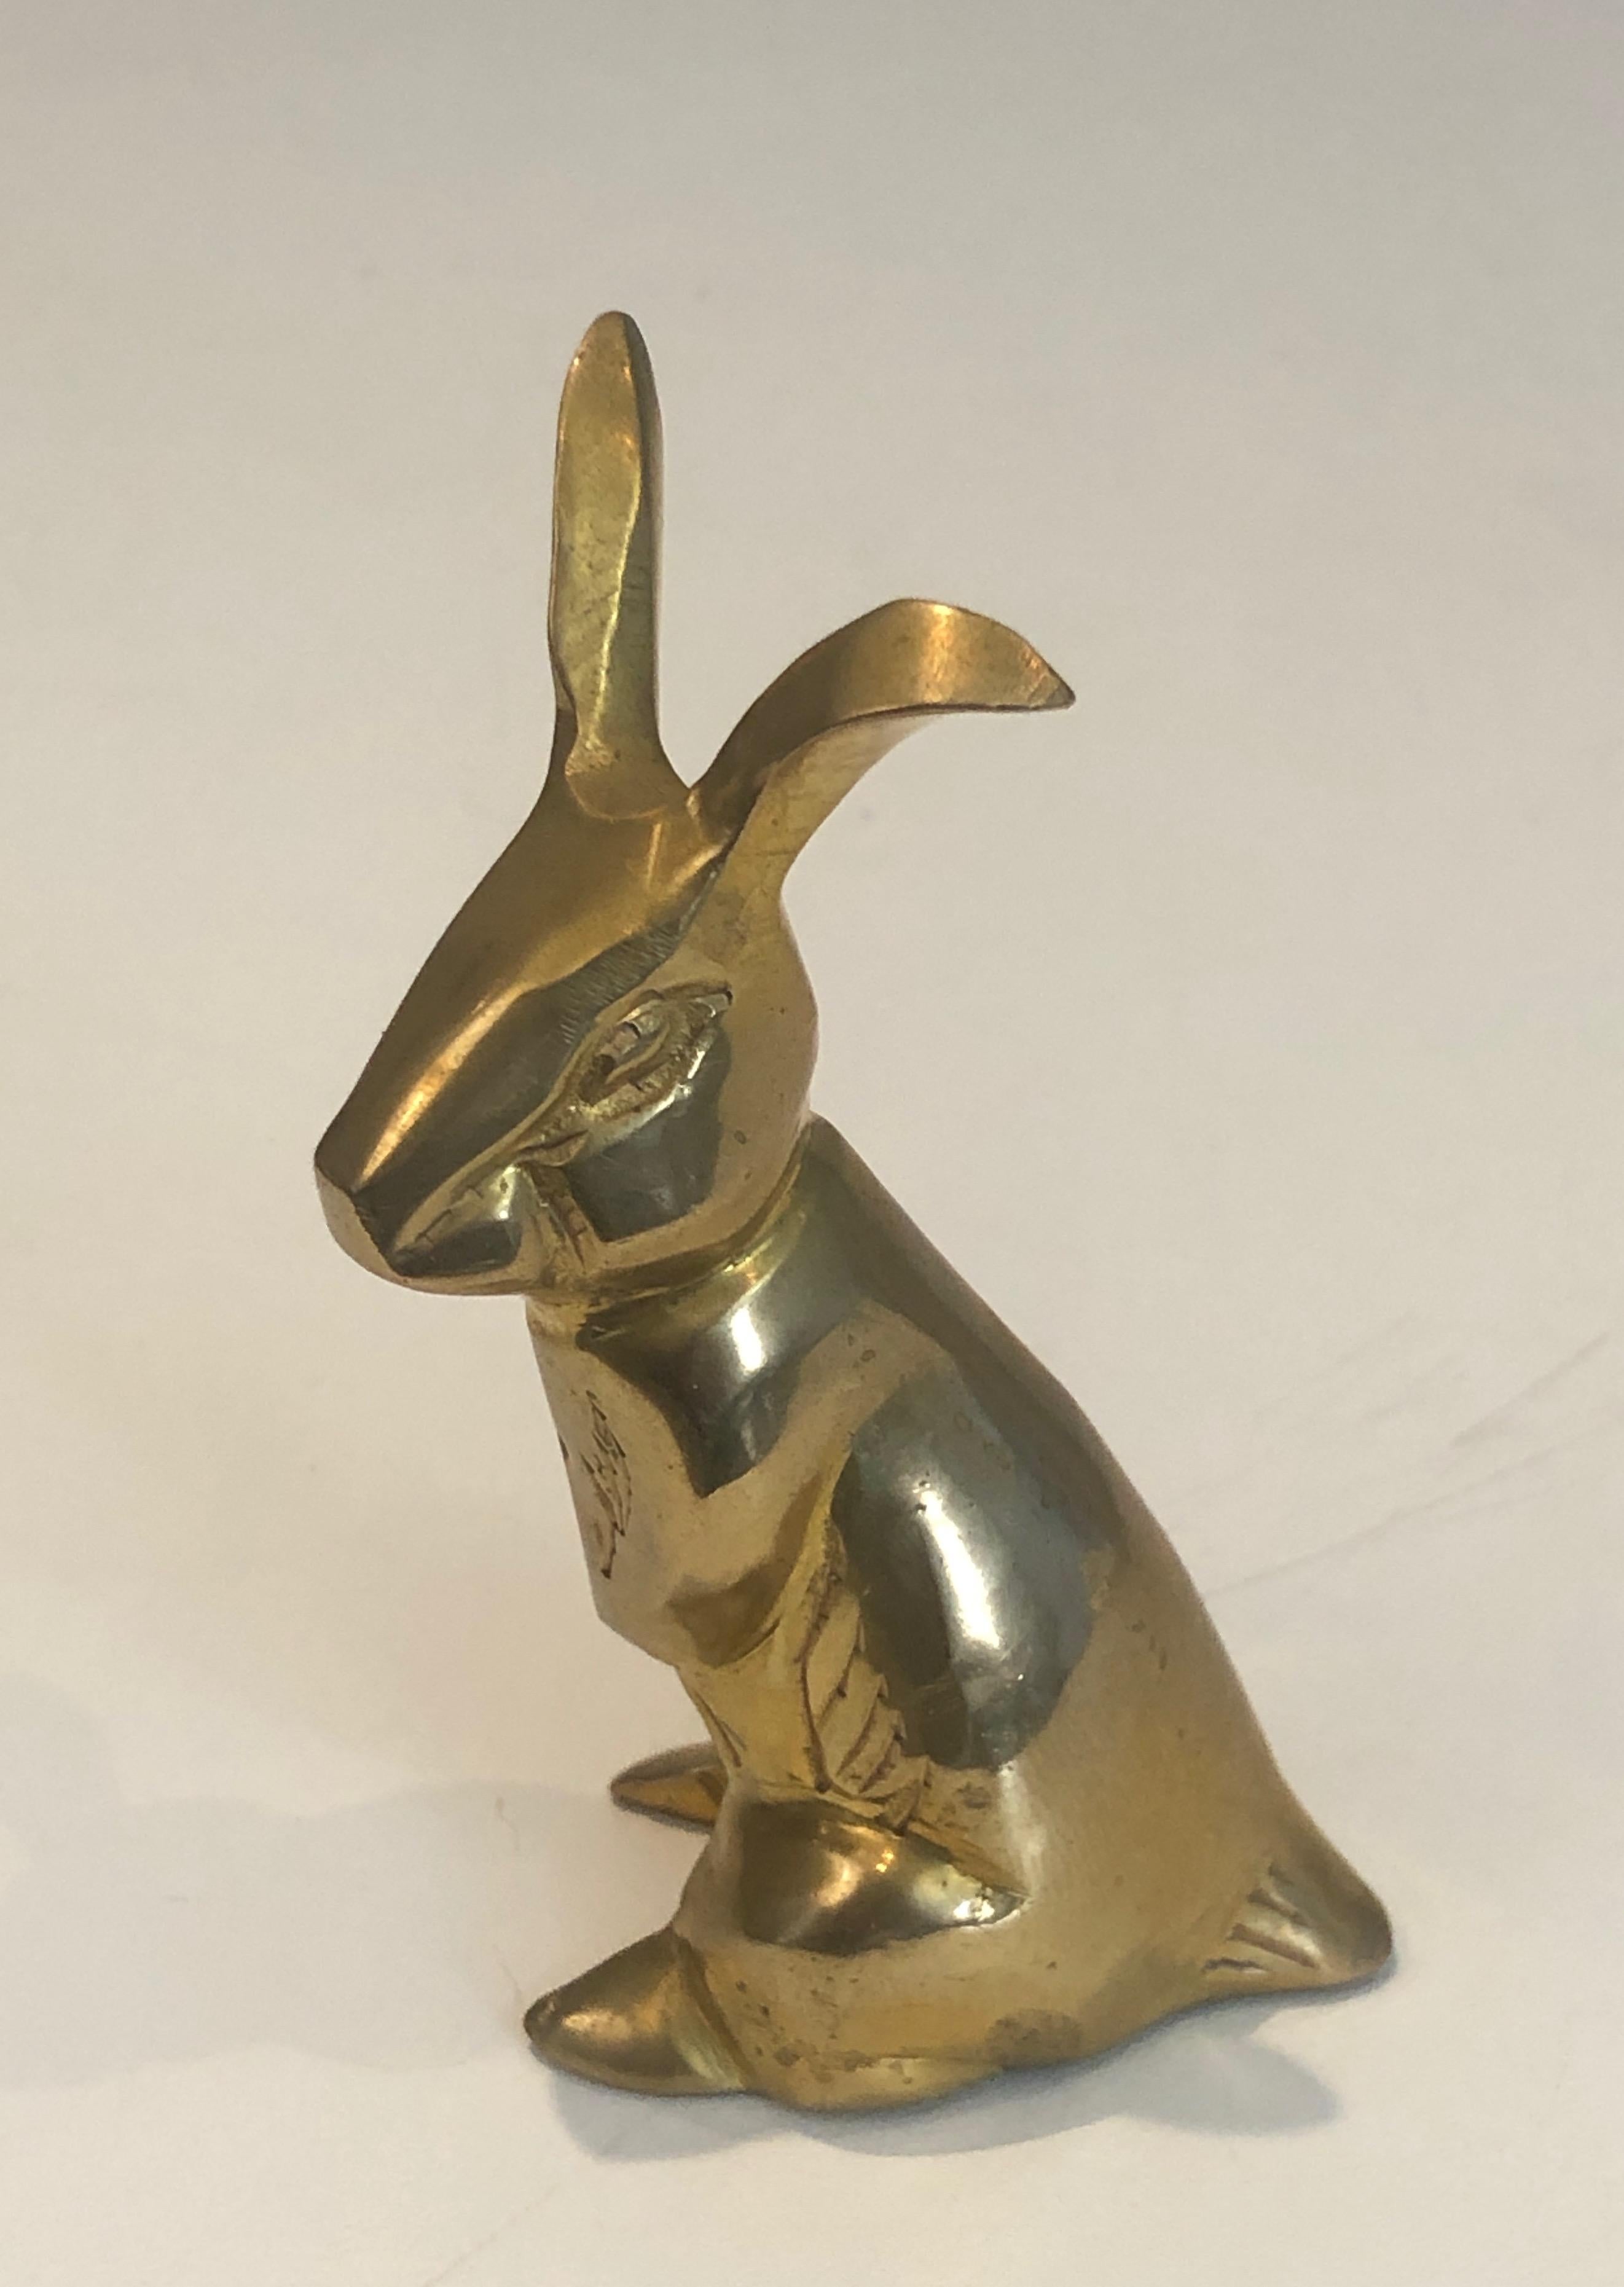 This small rabbit sculpture is made of brass. This is a French work, circa 1970.